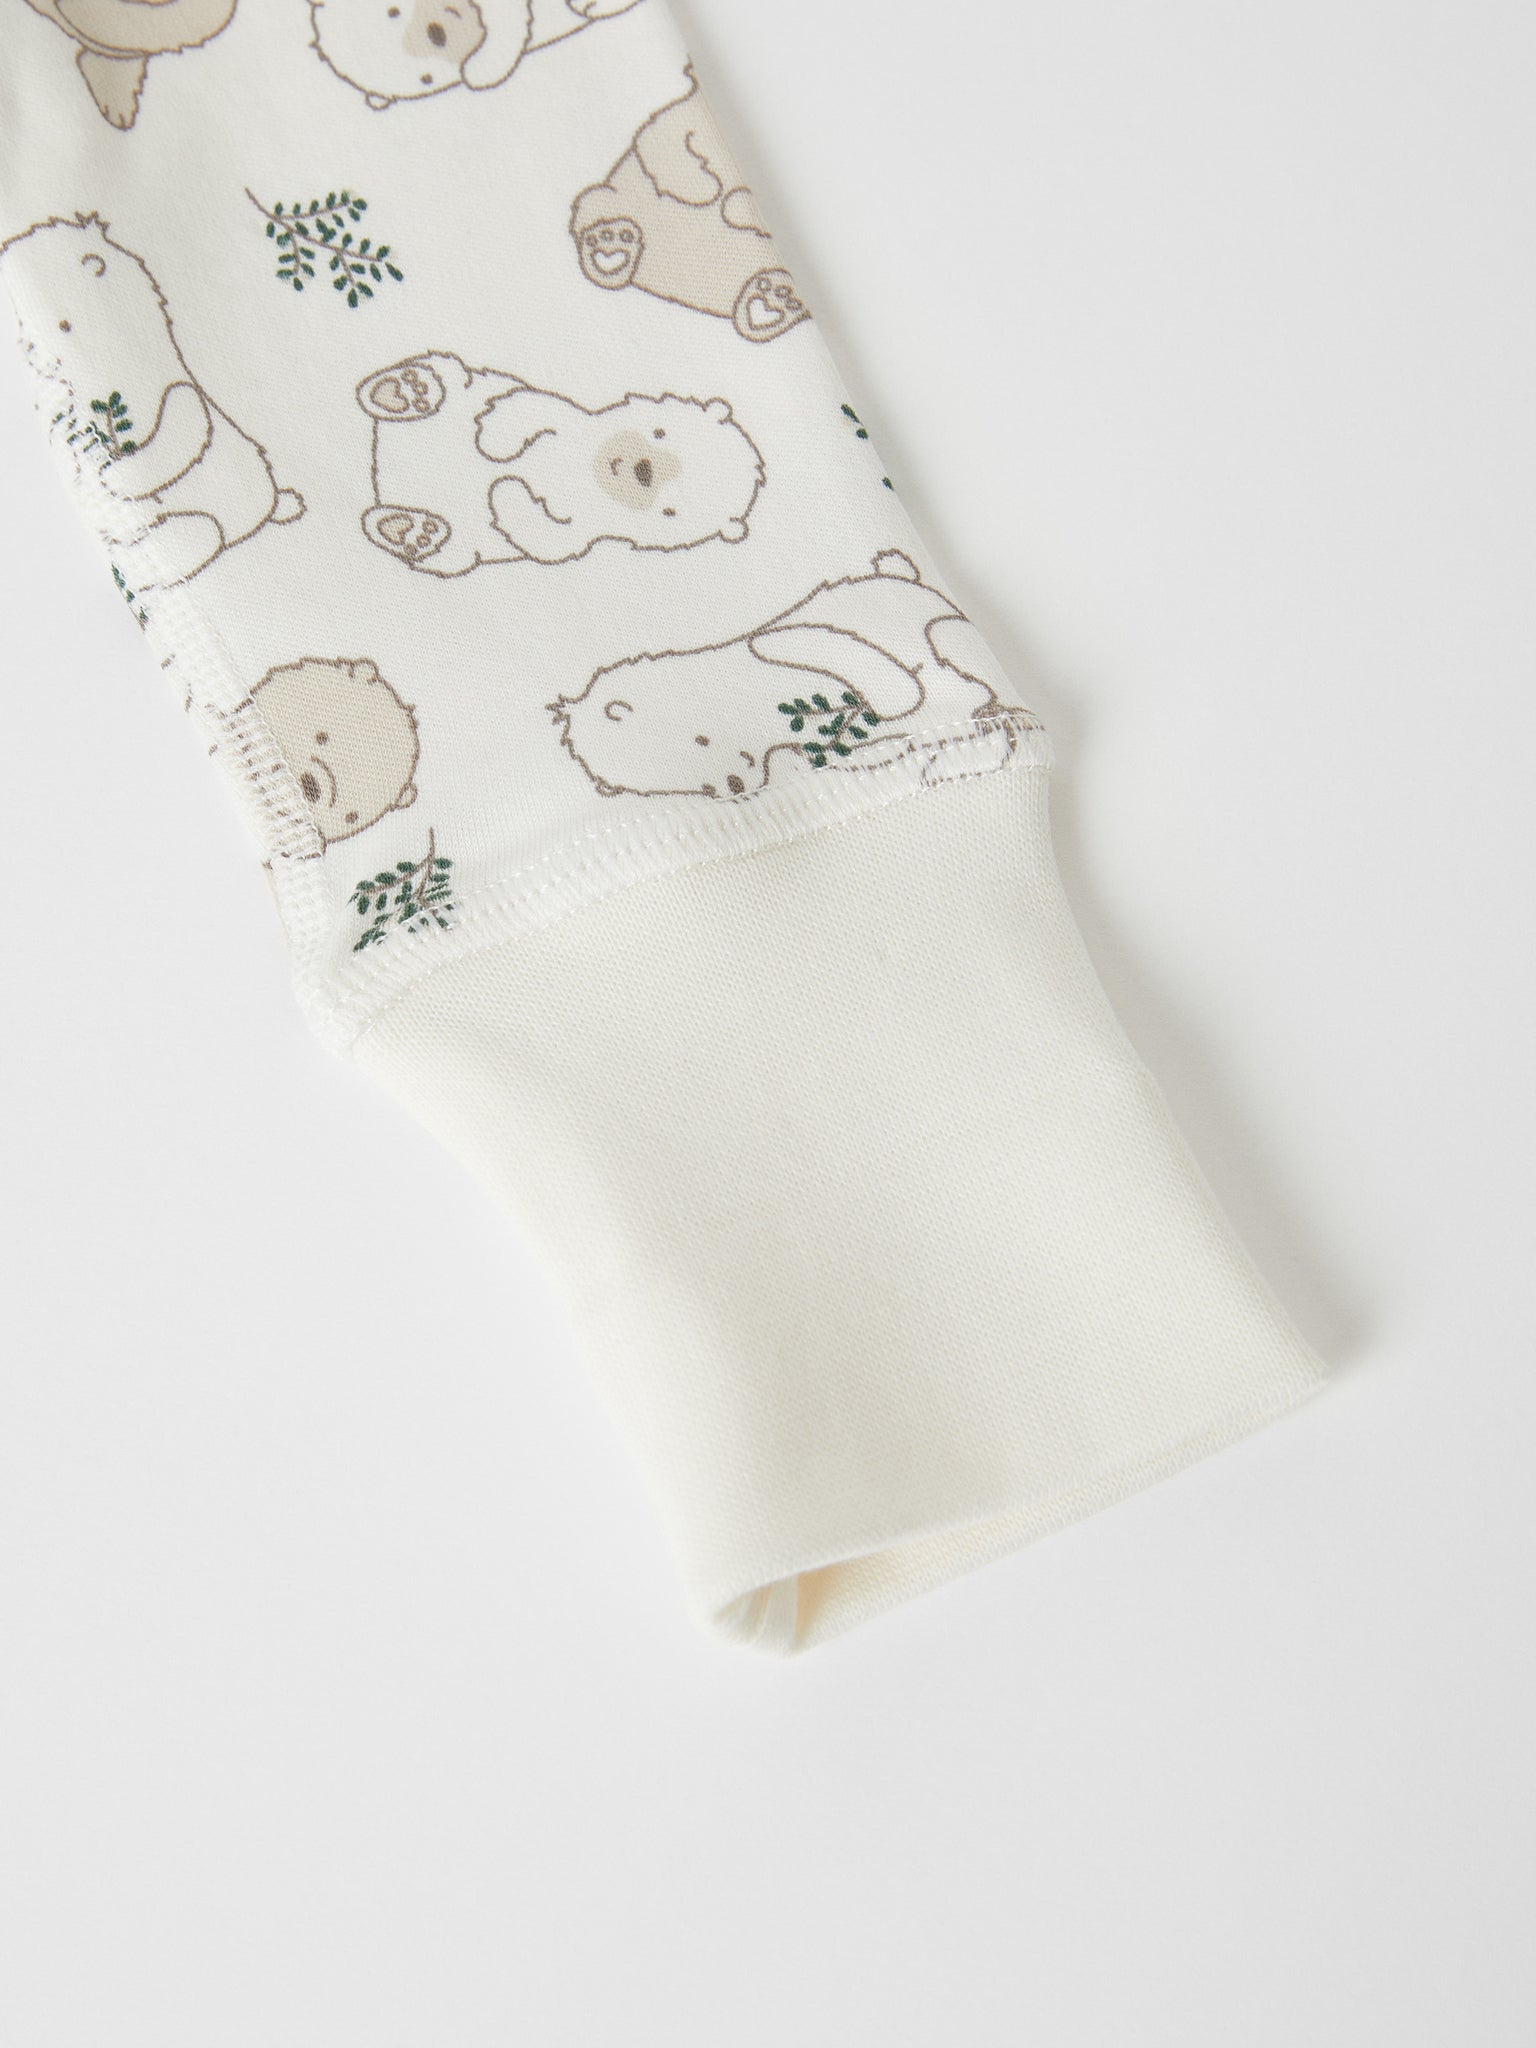 Bear Print Wraparound Babygrow from the Polarn O. Pyret baby collection. The best ethical baby clothes